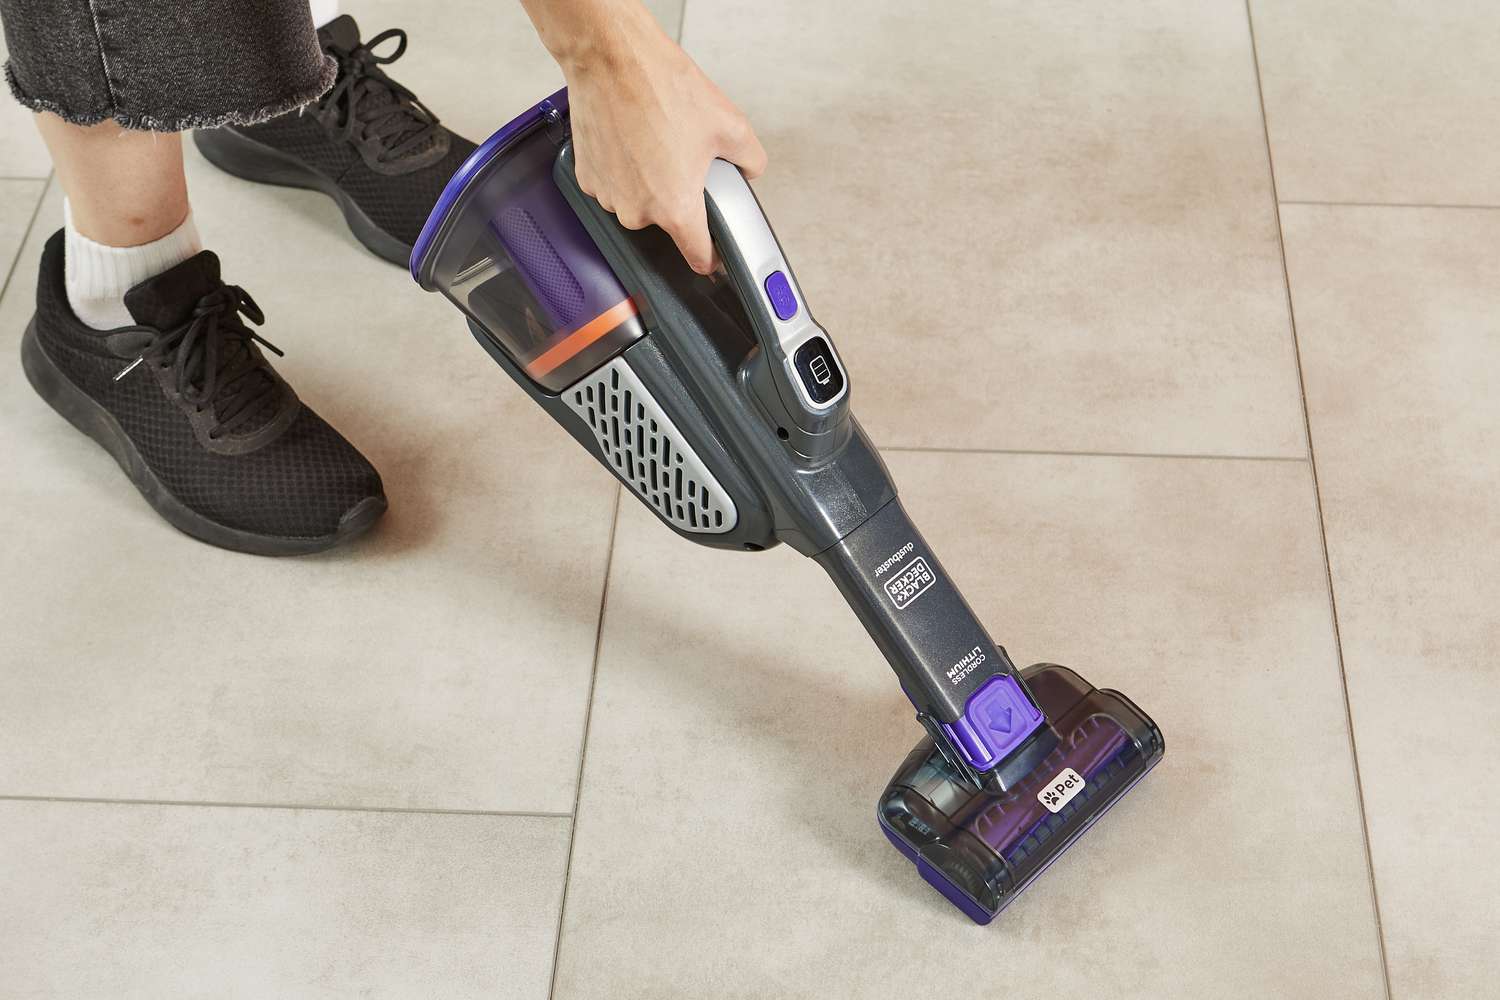 Person using the Black+Decker Dustbuster AdvancedClean+ Pet Cordless Hand Vacuum Cleaner to clean tile floor